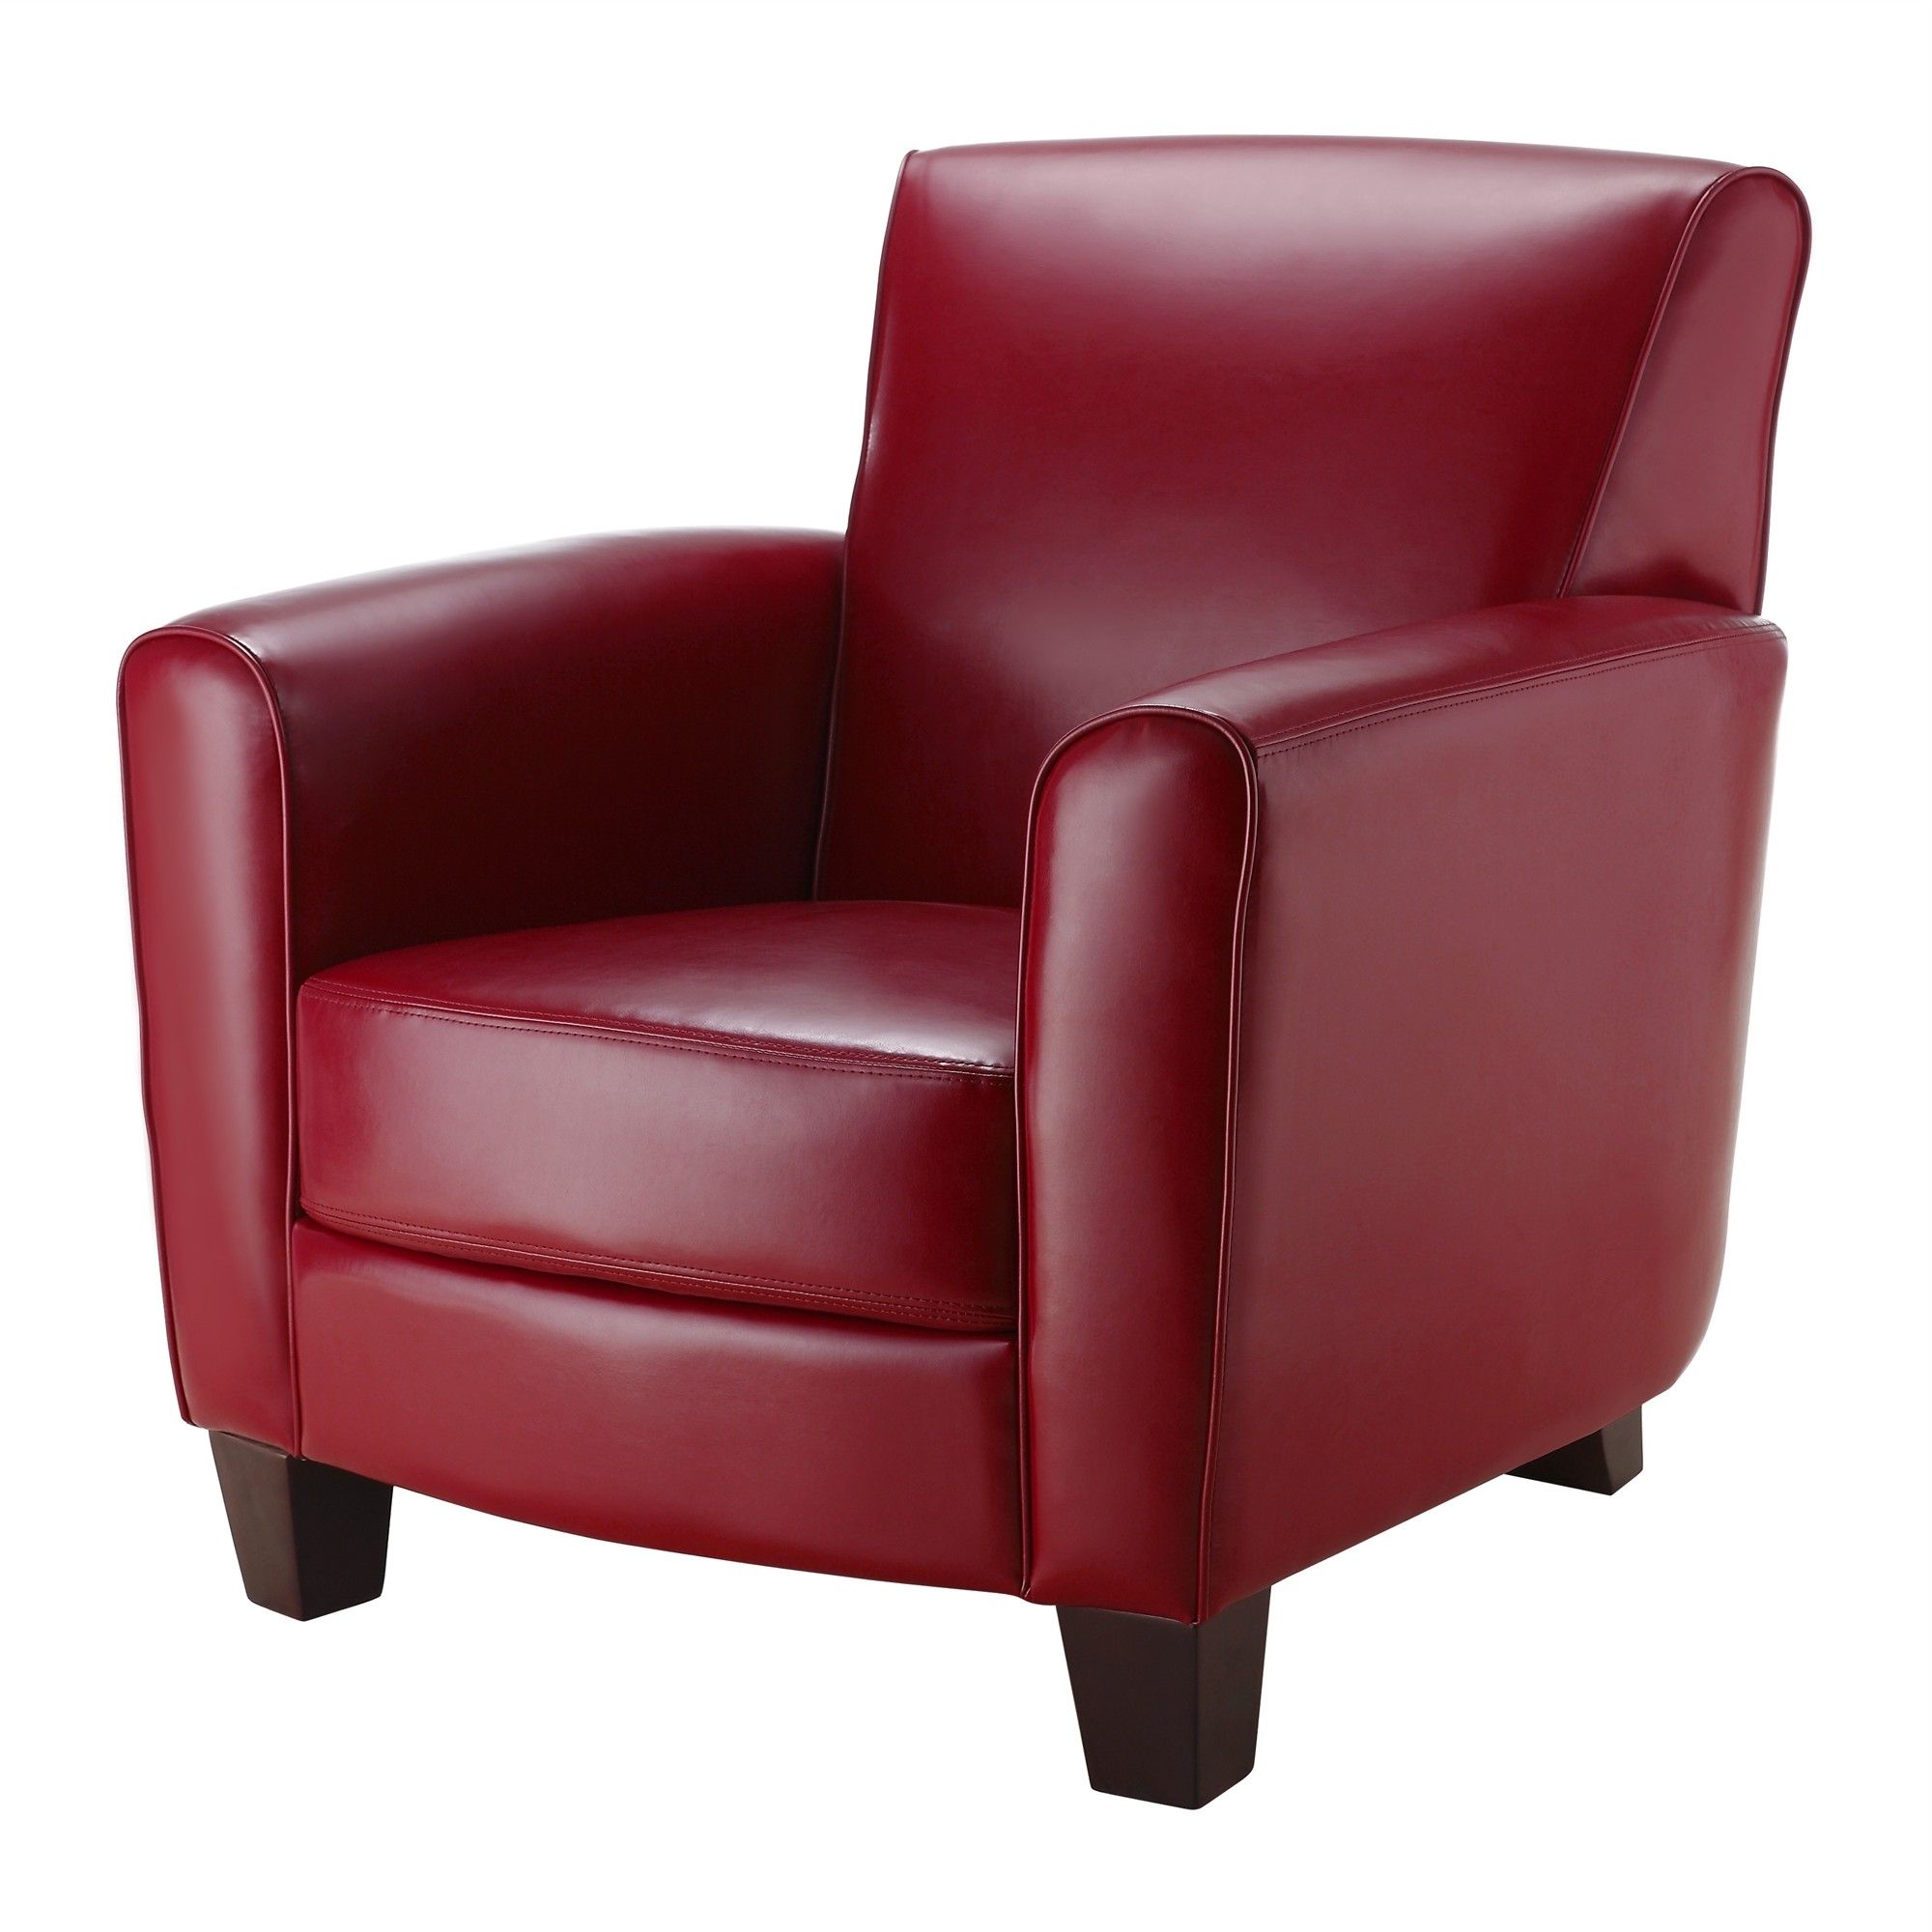 Red Leather Dining Chairs For Recent Red Leather Dining Chair Genuine Leather Club Chair (View 19 of 25)